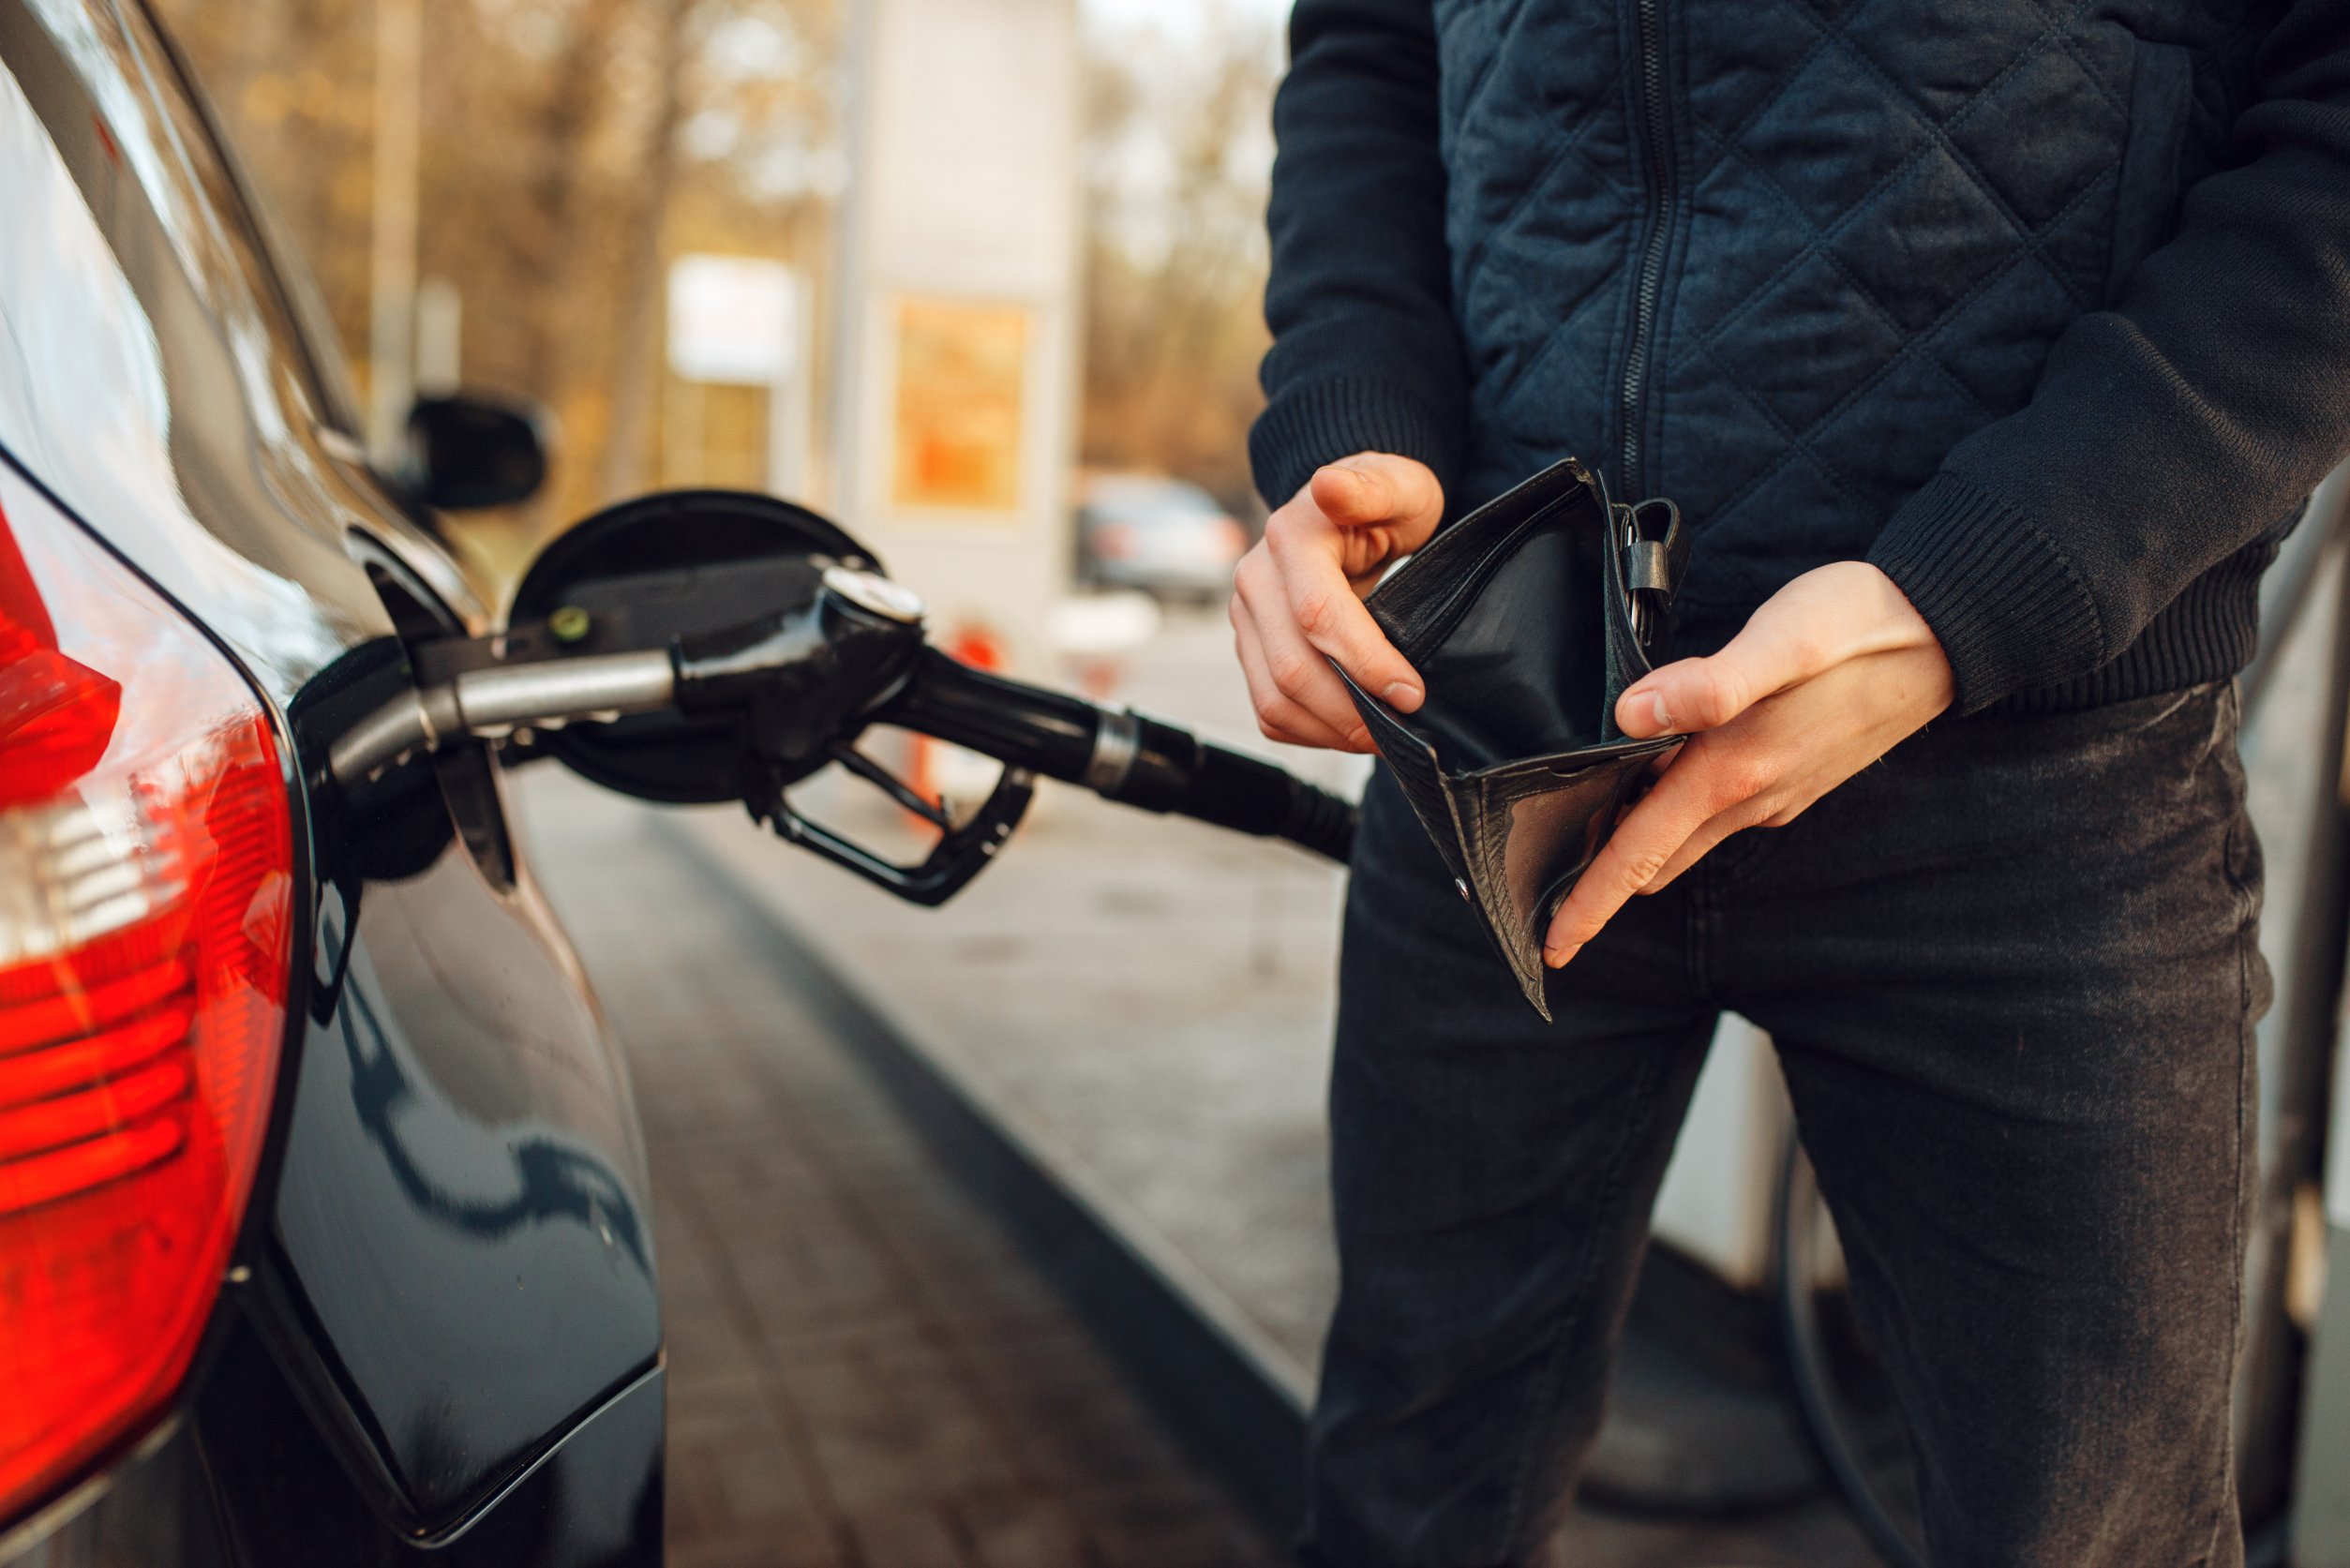 Gasoline price may record largest one-day decline in a decade – GasBuddy